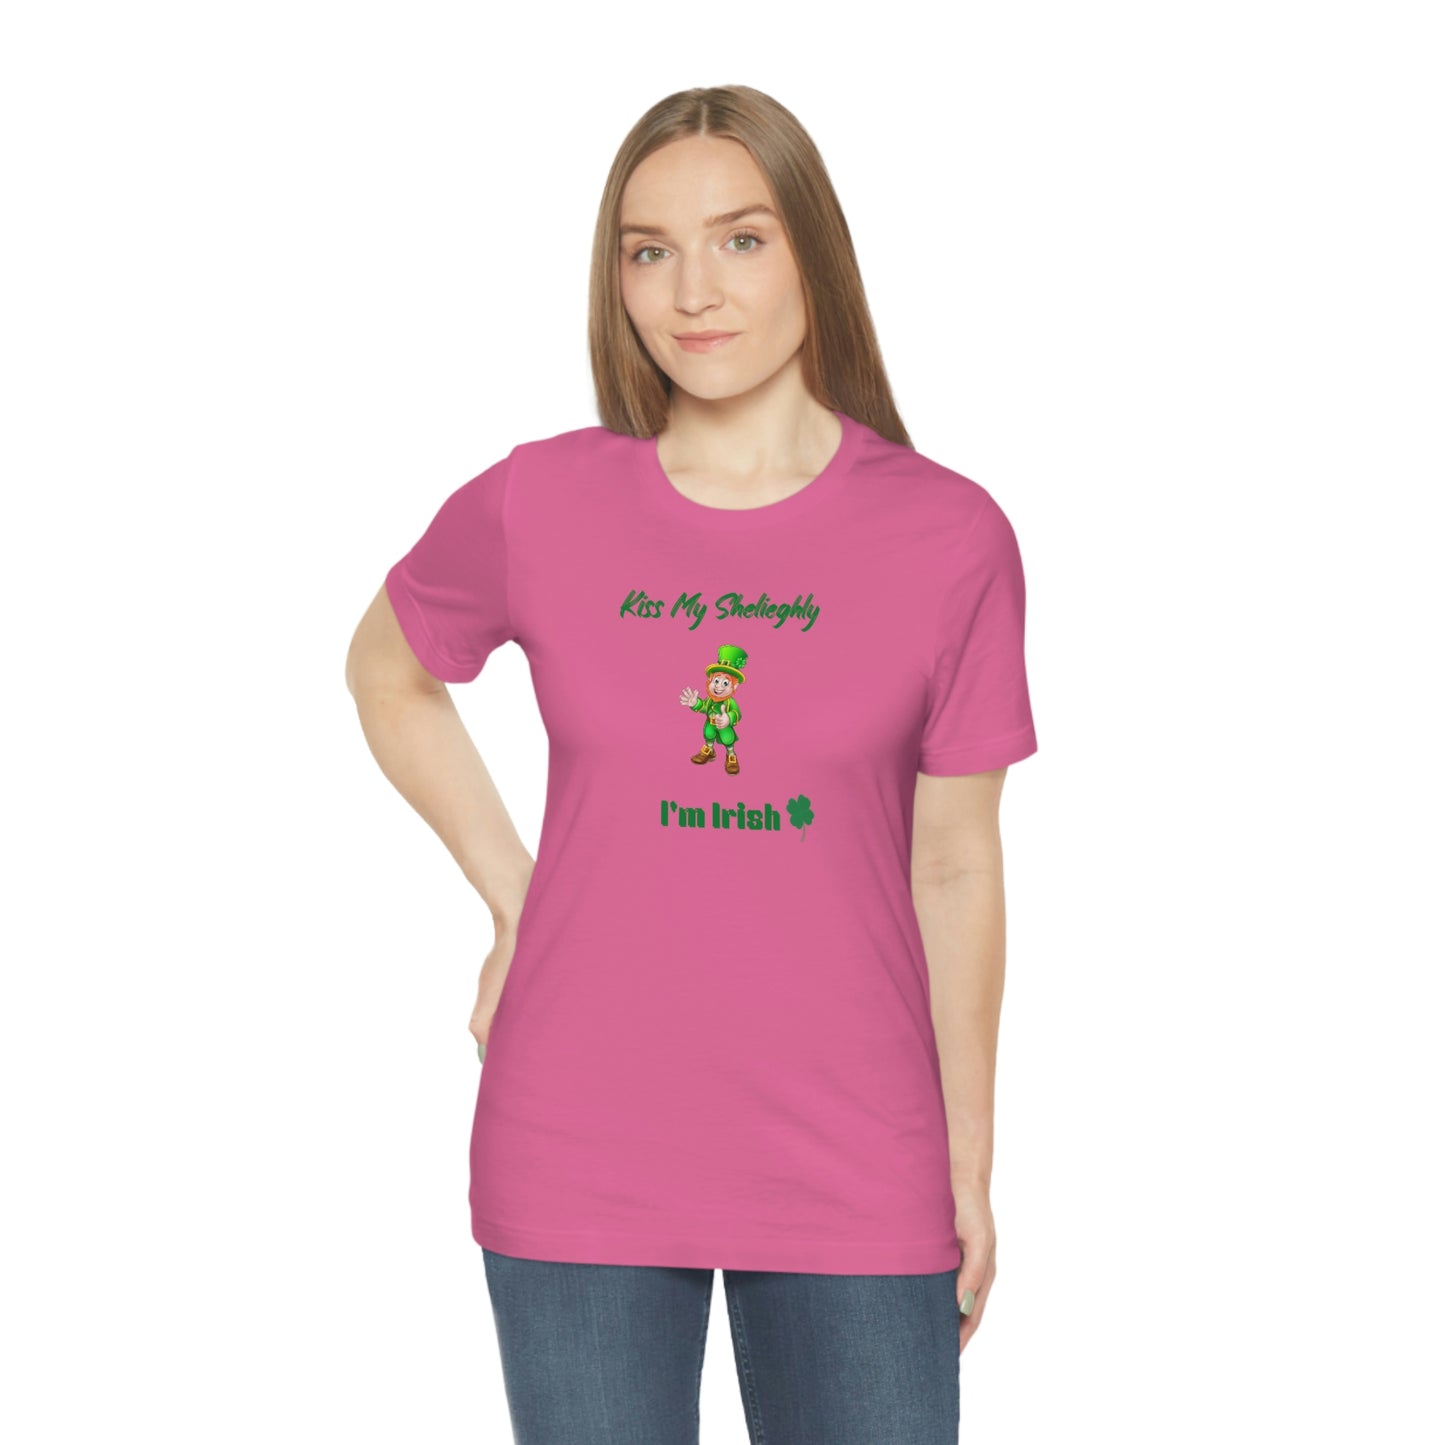 St. Patrick's Day:  Men's Tee:  Kiss My Sheleighly